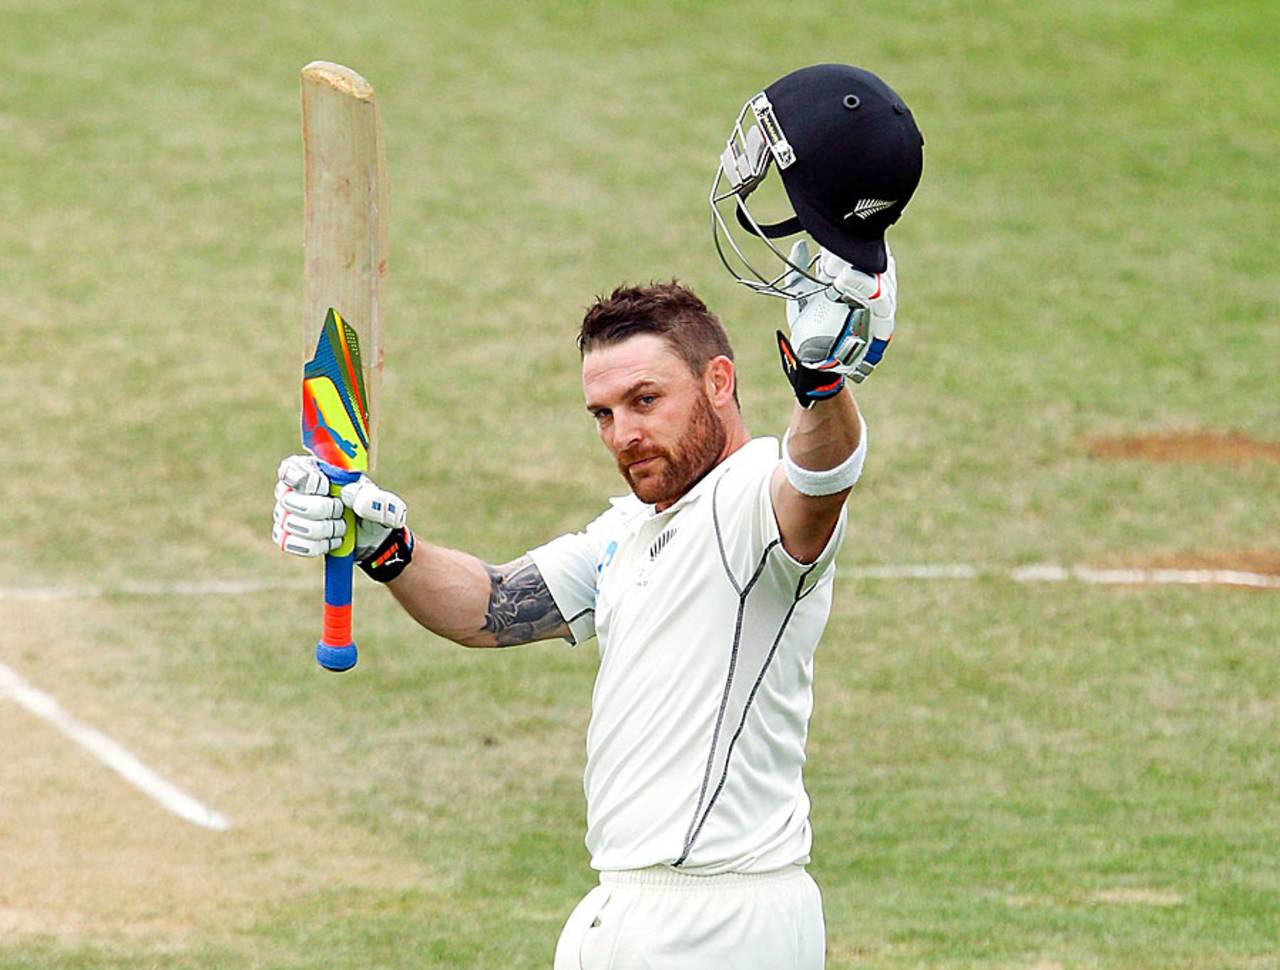 Brendon McCullum became the first New Zealand batsman to score a triple-century, New Zealand v India, 2nd Test, Wellington, 5th day, February 18, 2014